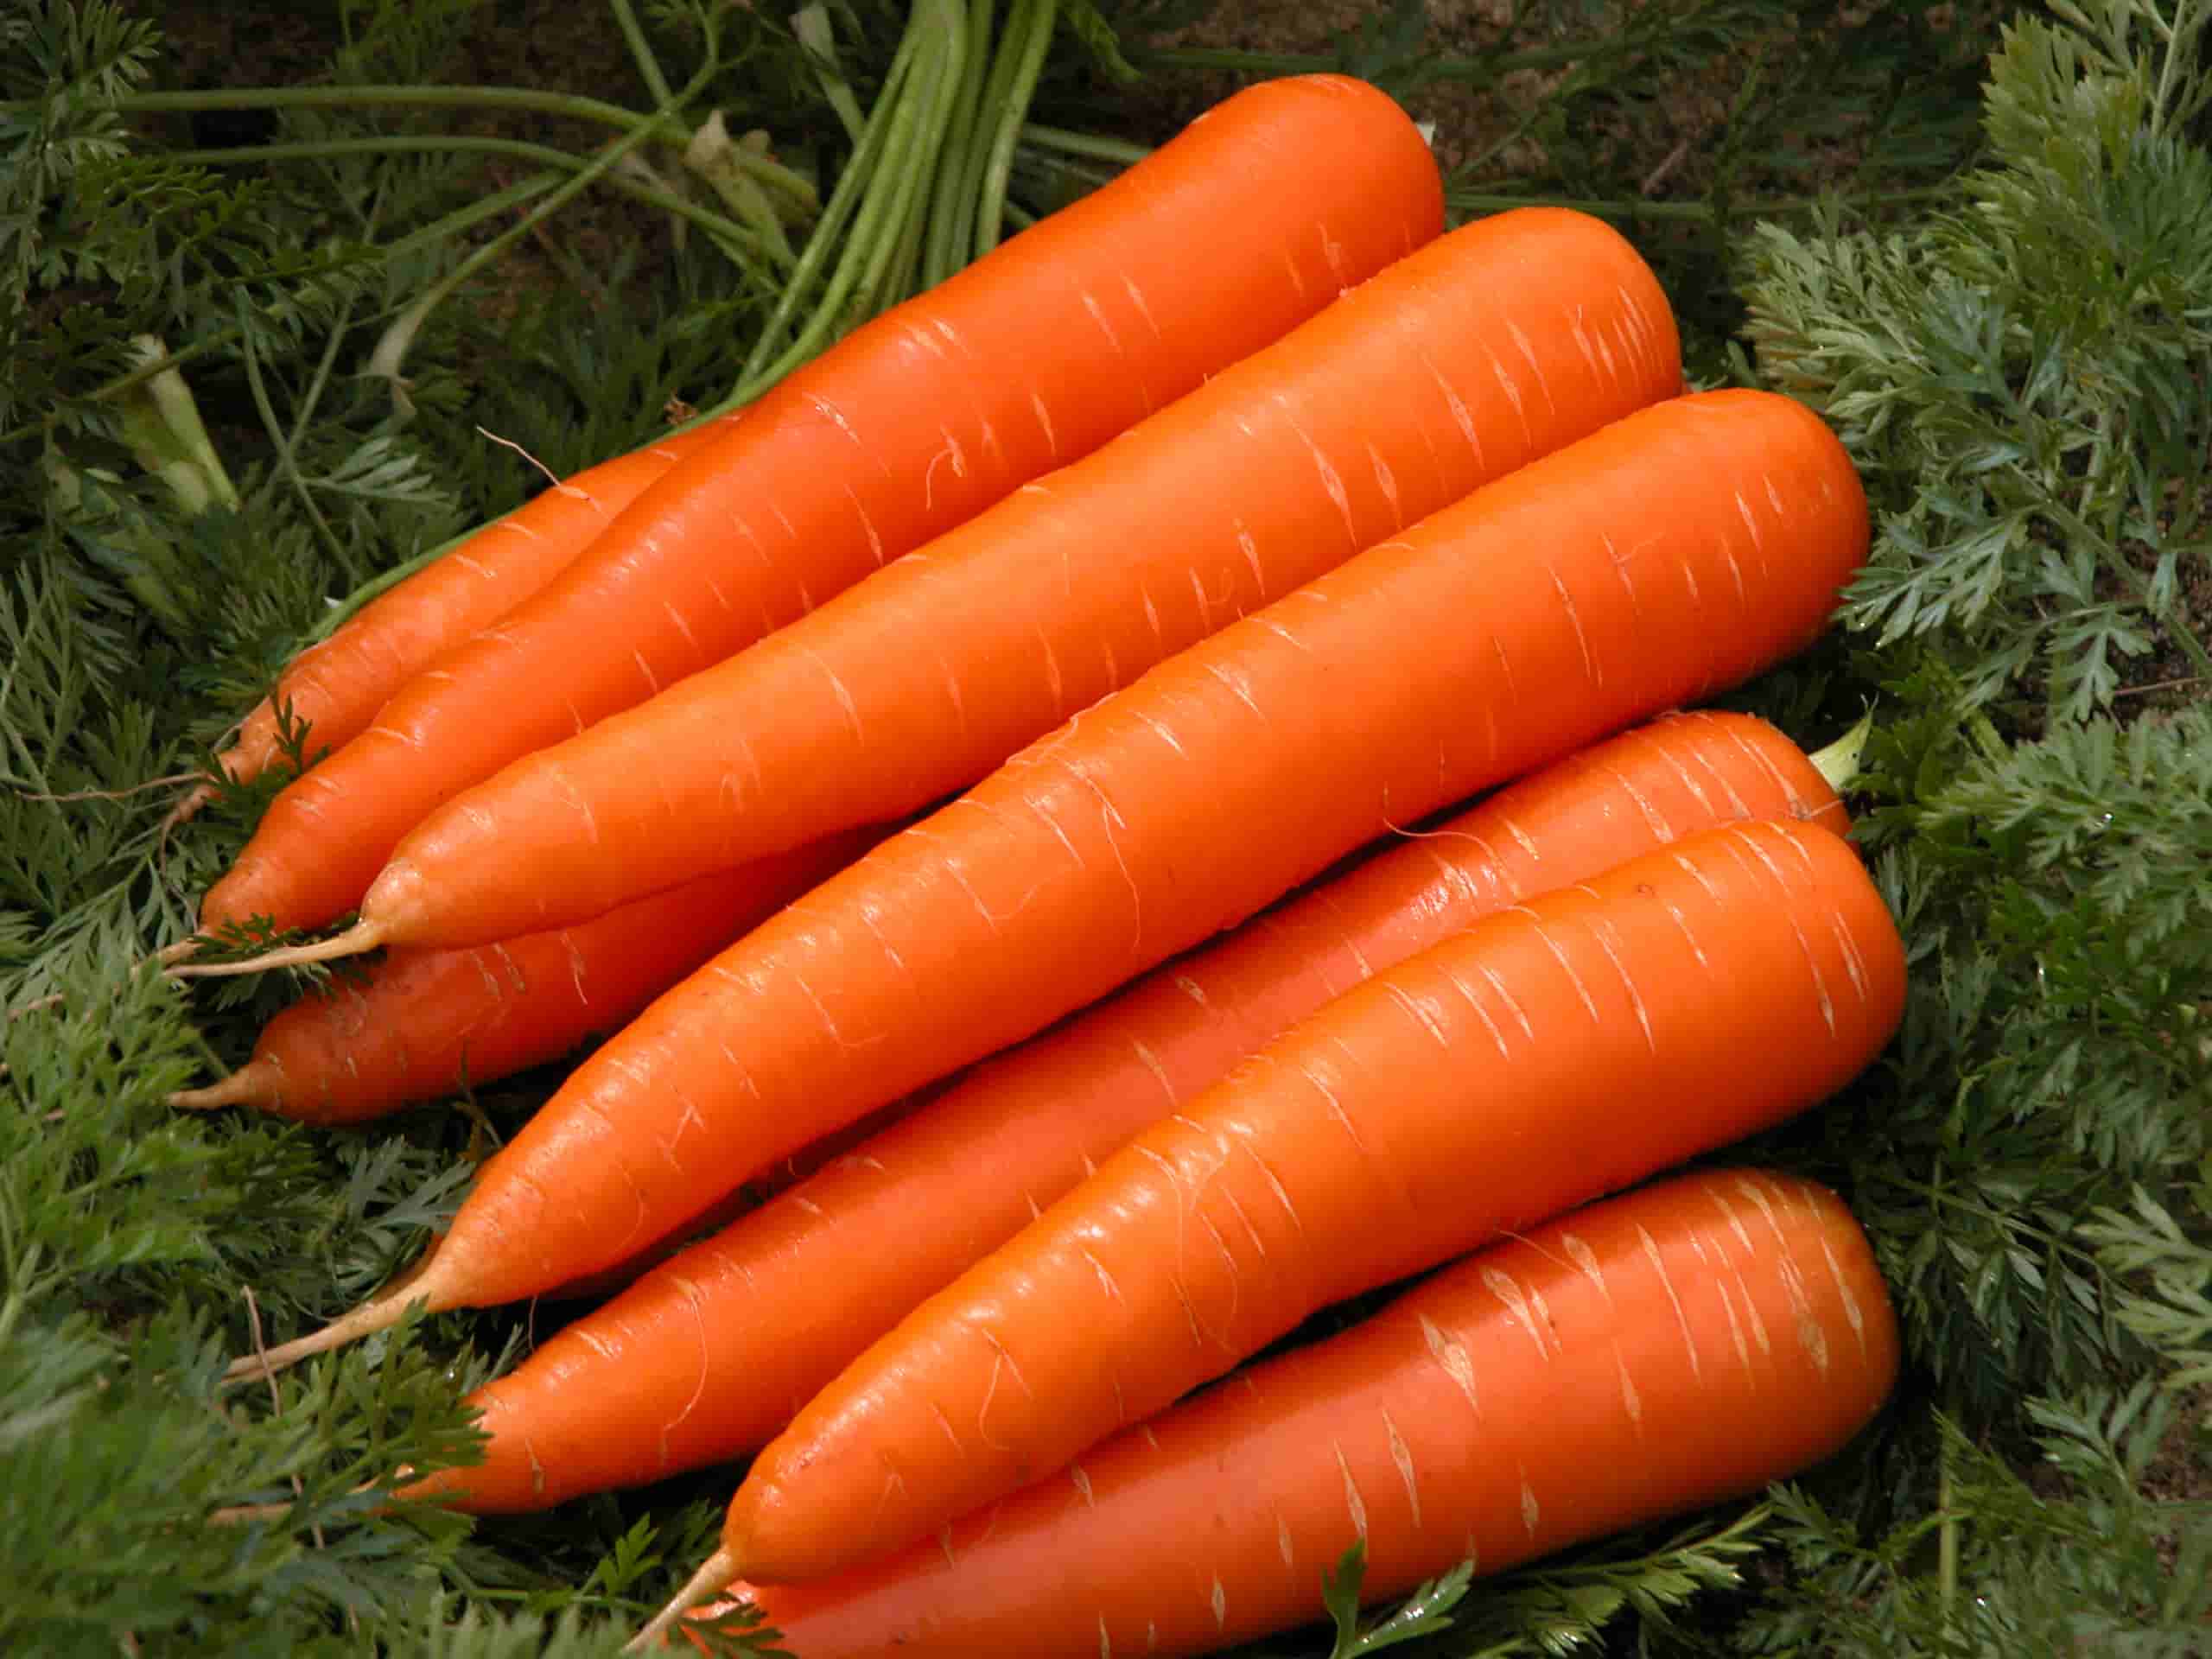 Carrot Nantes seeds from Royal Seed, a long straight tasty ware carrot with deep orange color and high vitamin content. Maturity is 110 days from planting, length is 17-20cms plus, yield potential is 17 tonnes per acre. Cylindrical and straight with a rounded tip. Partial tolerance to Powdery Mildew